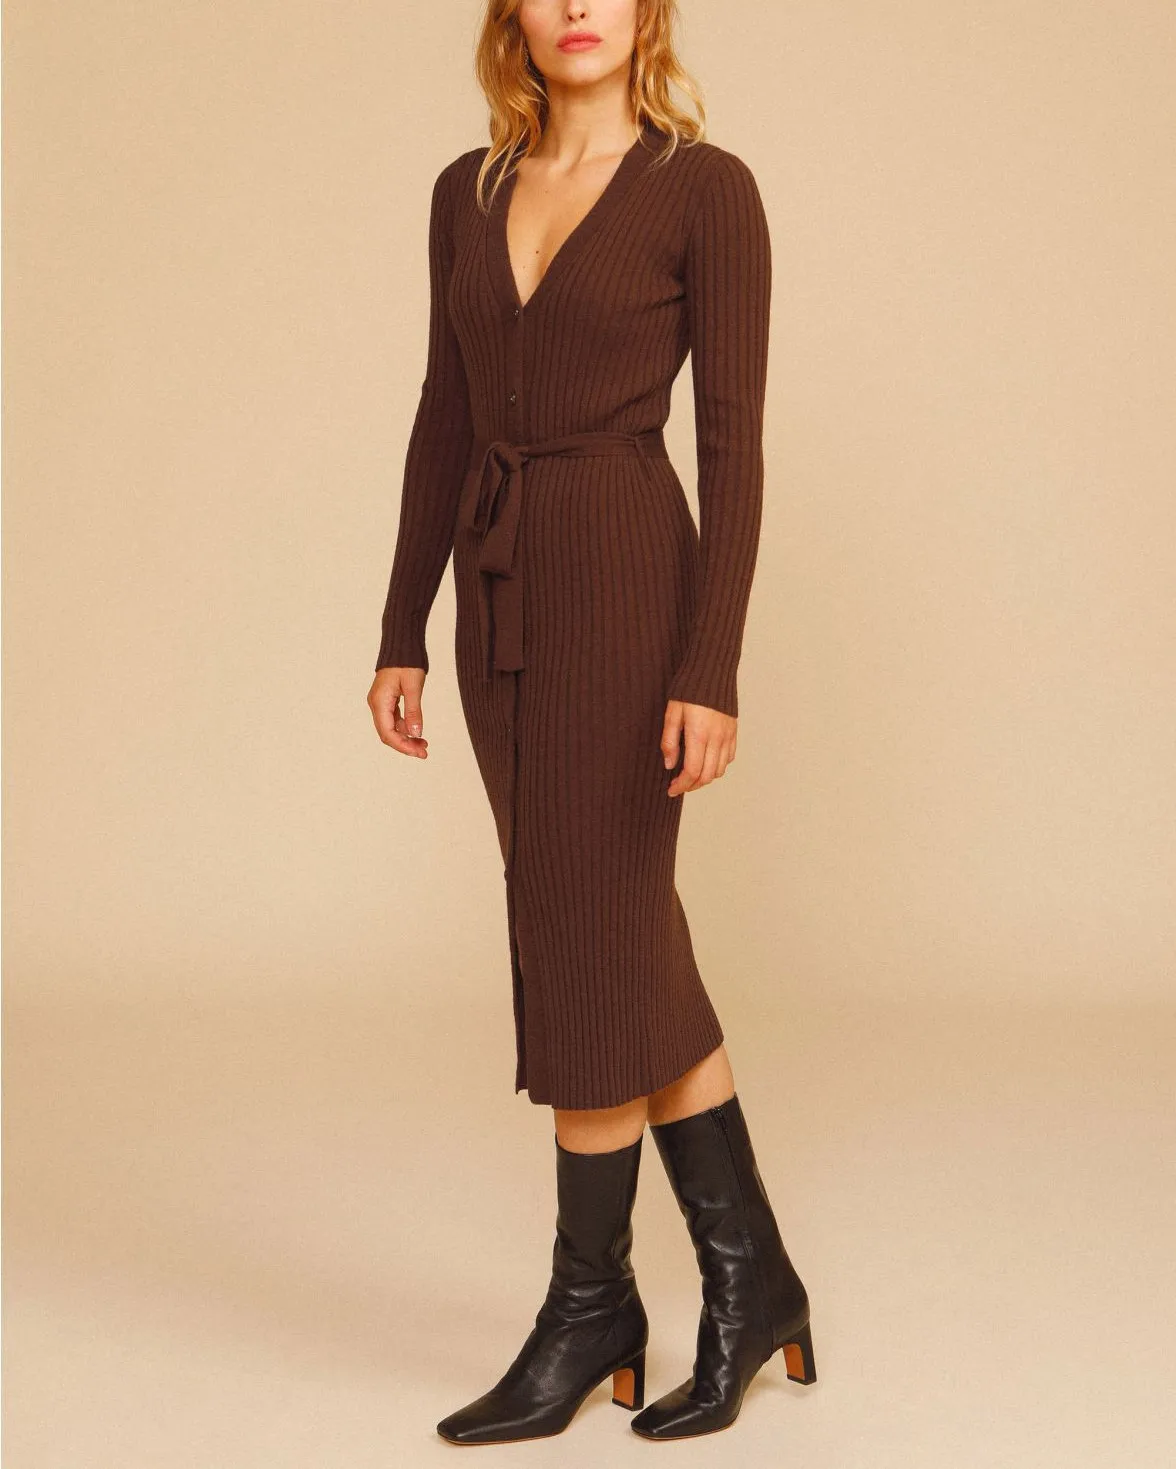 

Women Long Sleeve V-Neck Stripes Midi Dress Slim Female Single Breasted Knitwear Robes with Sashes 2021 Fall Winter